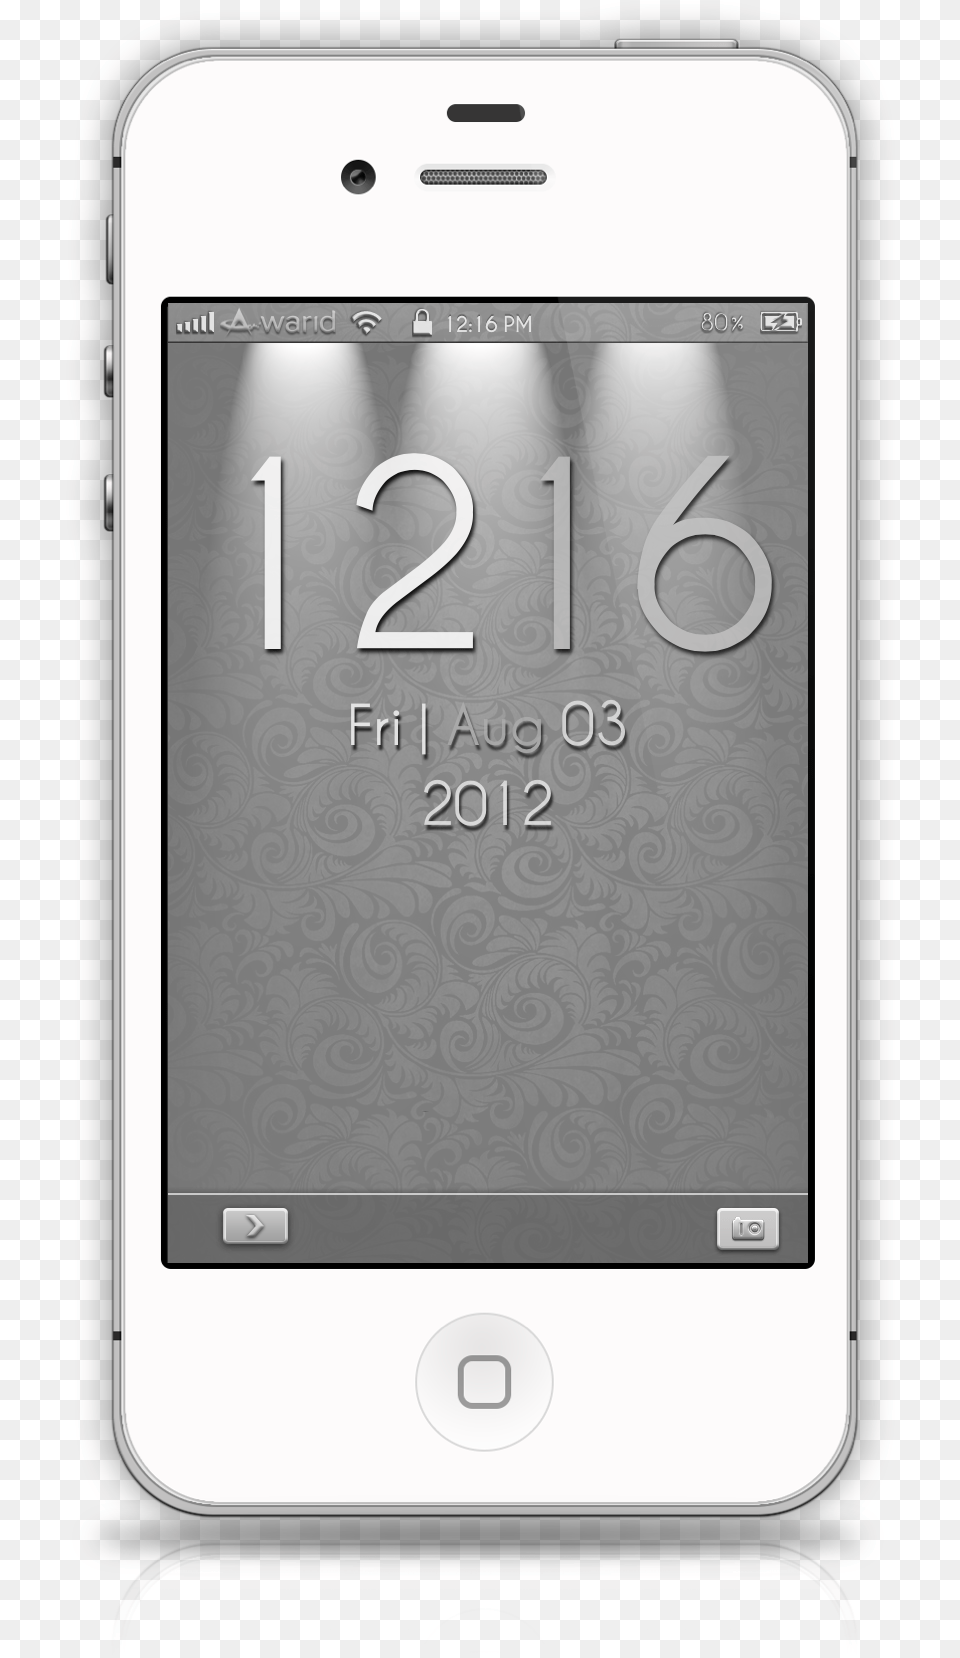 Lindo Light Hd 2 Smartphone, Electronics, Mobile Phone, Phone, Iphone Free Png Download